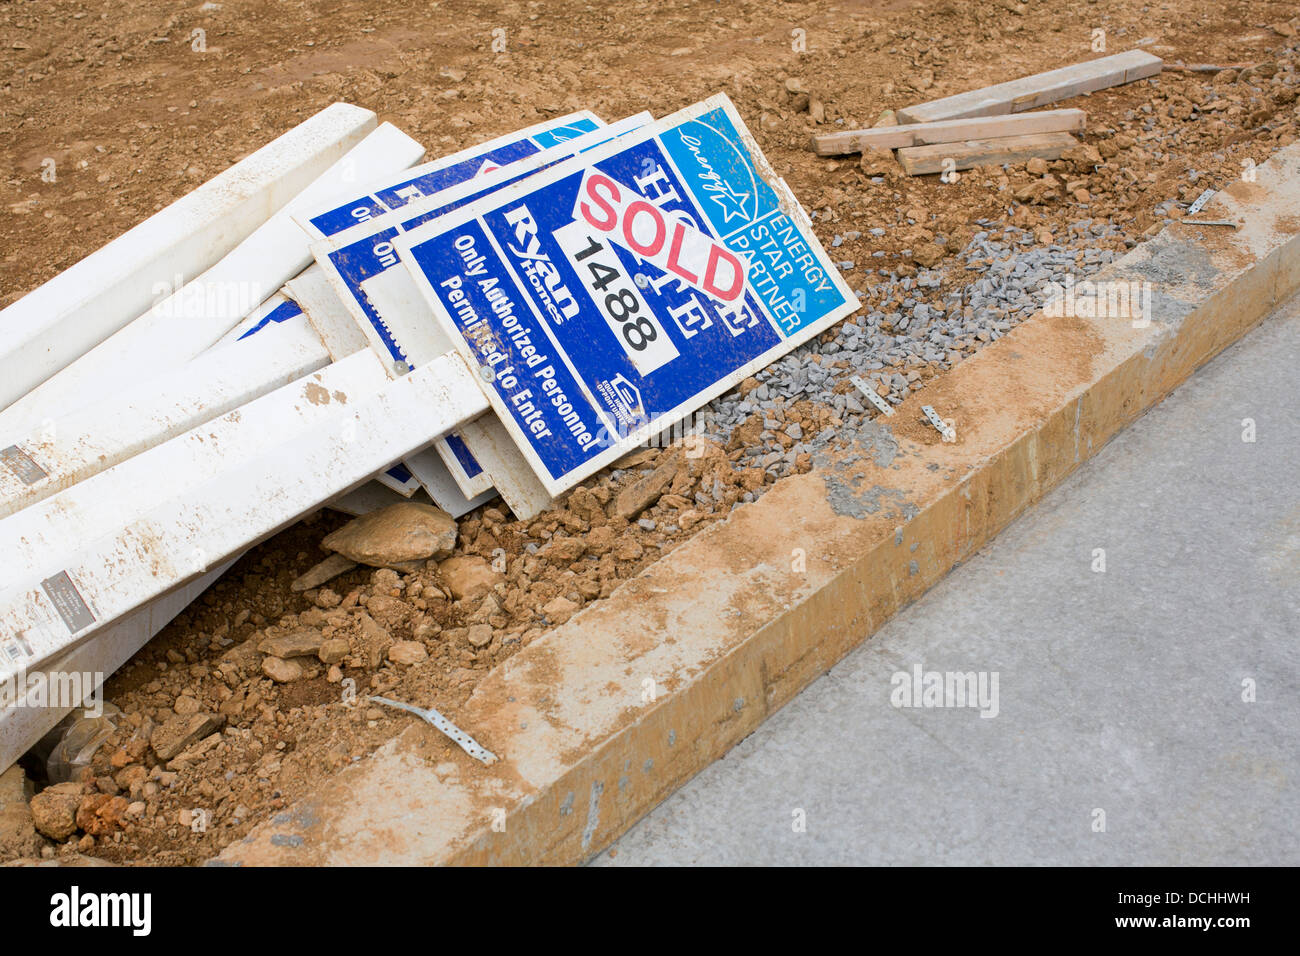 Ryan Homes 'Sold' signs in a new housing development.  Stock Photo